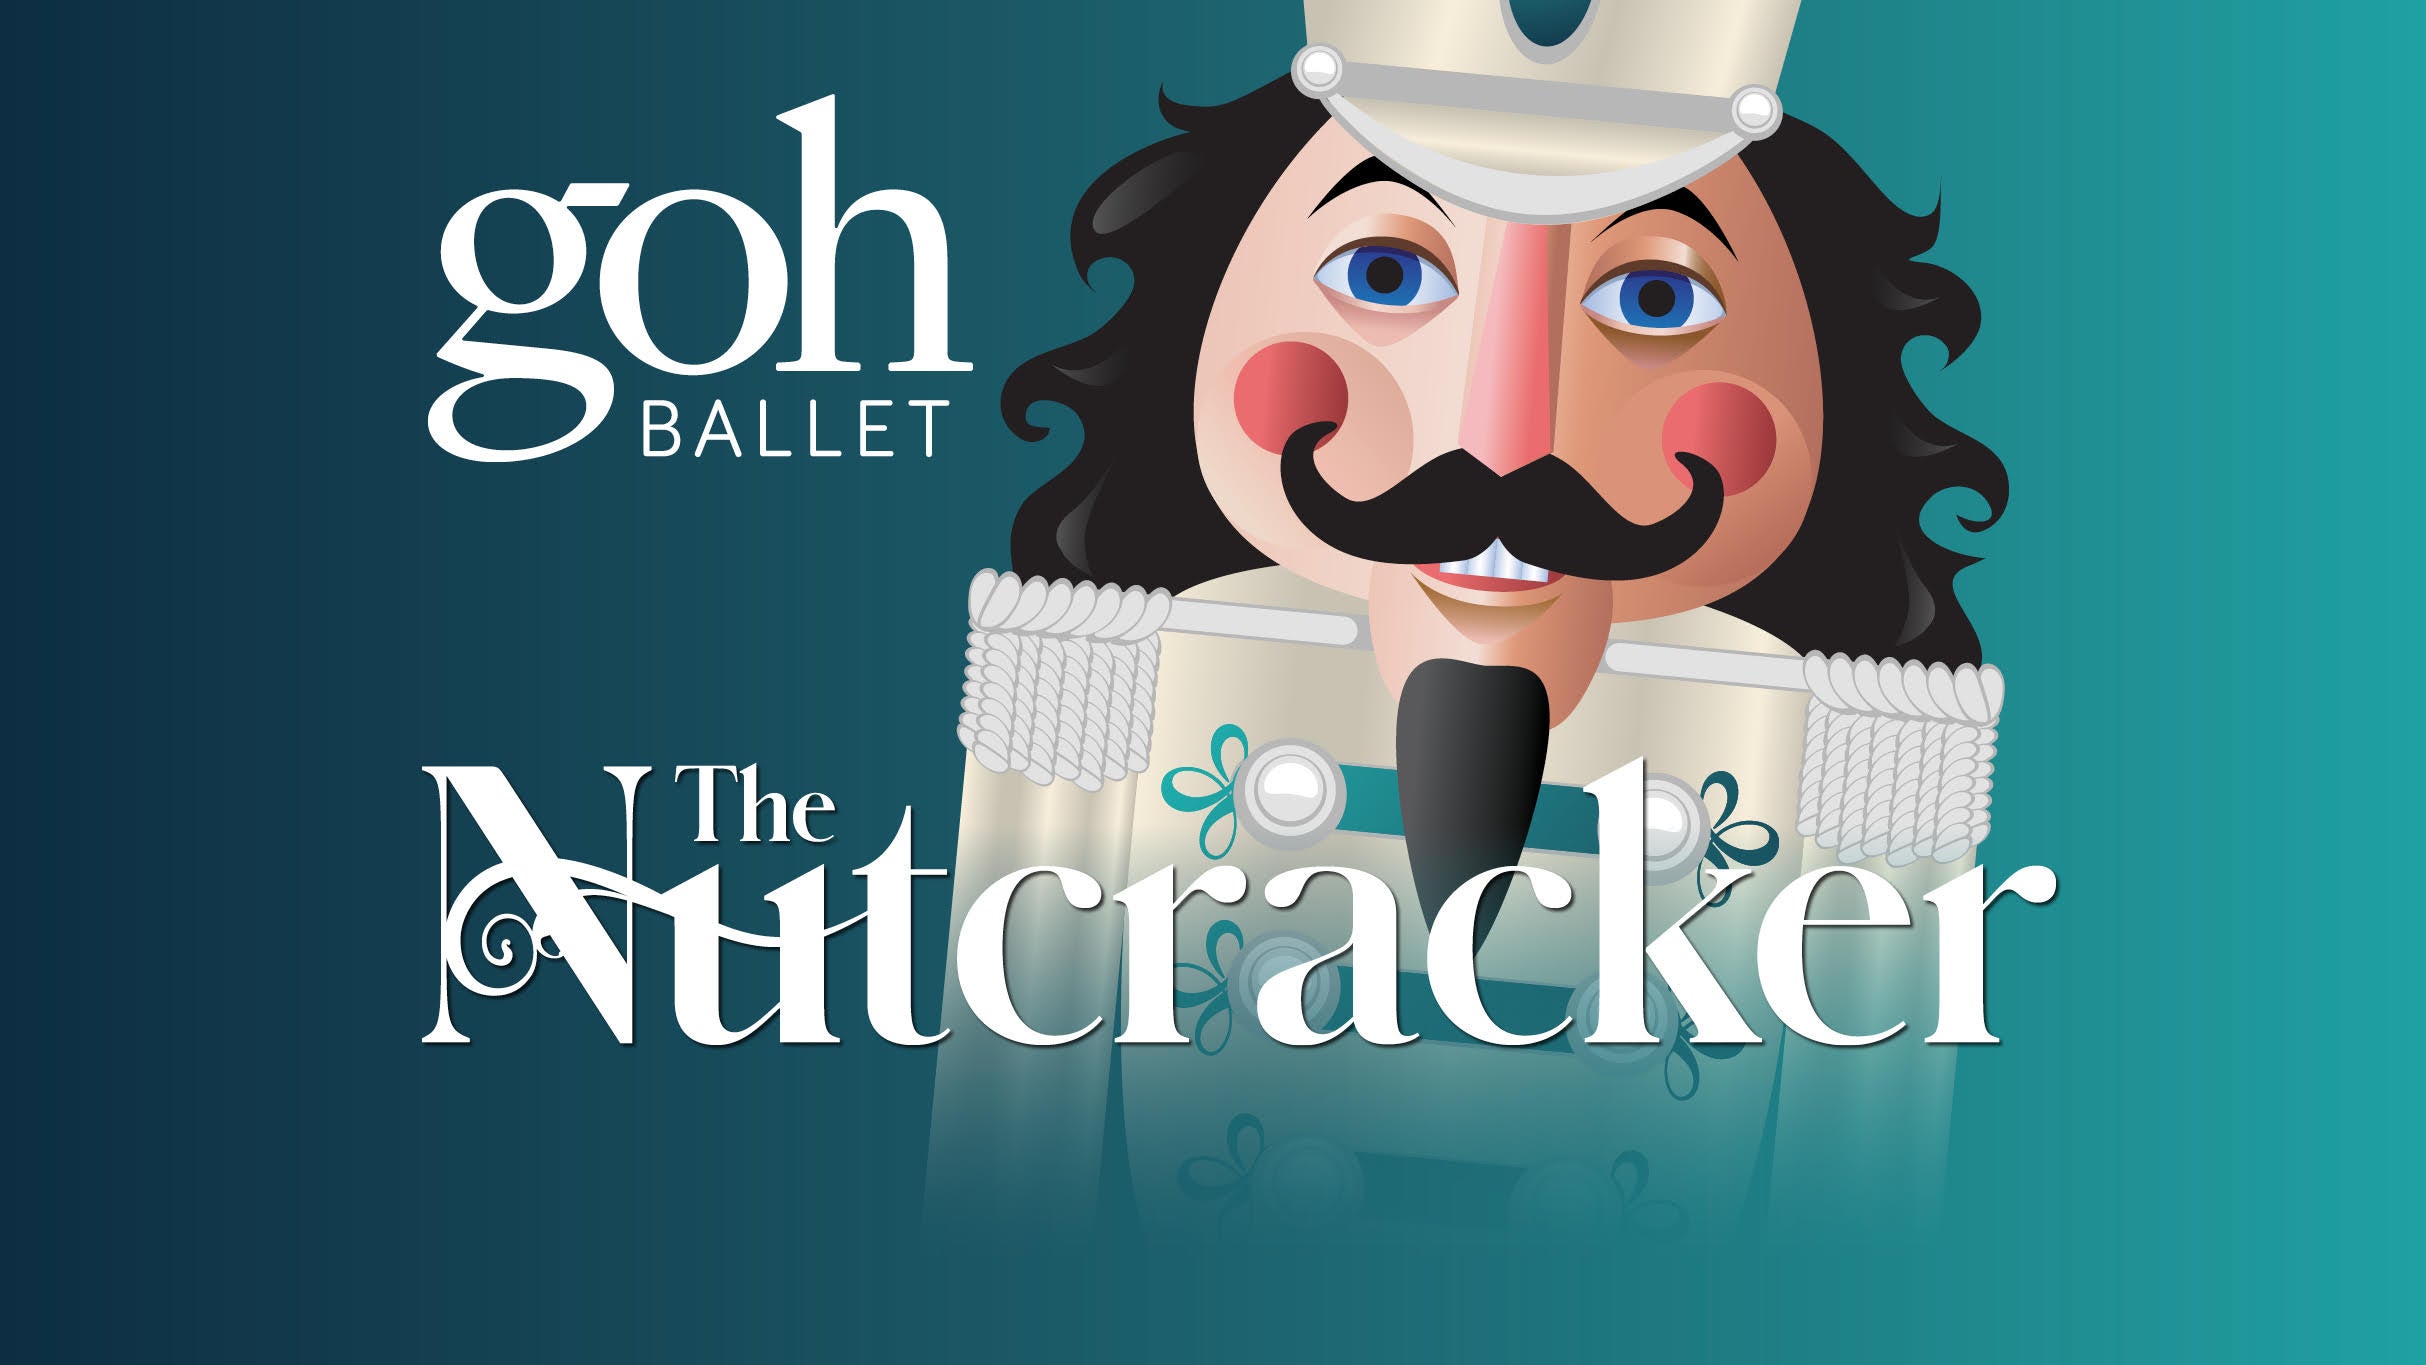 Goh Ballet's The Nutcracker Presented by RBC in Vancouver promo photo for Valentine's Day Promo presale offer code